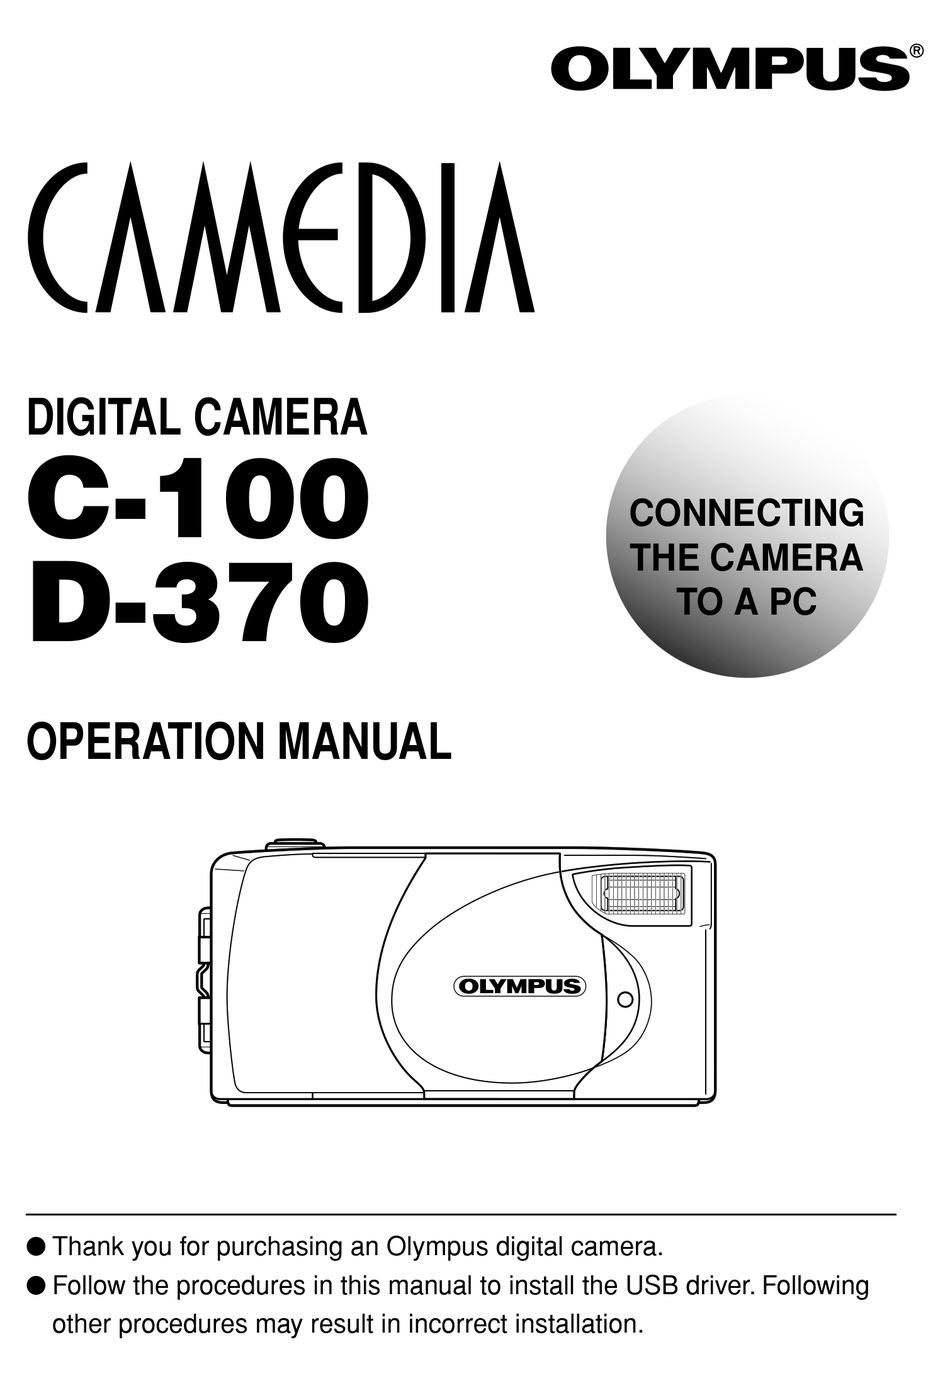 olympus camera drivers for windows 7